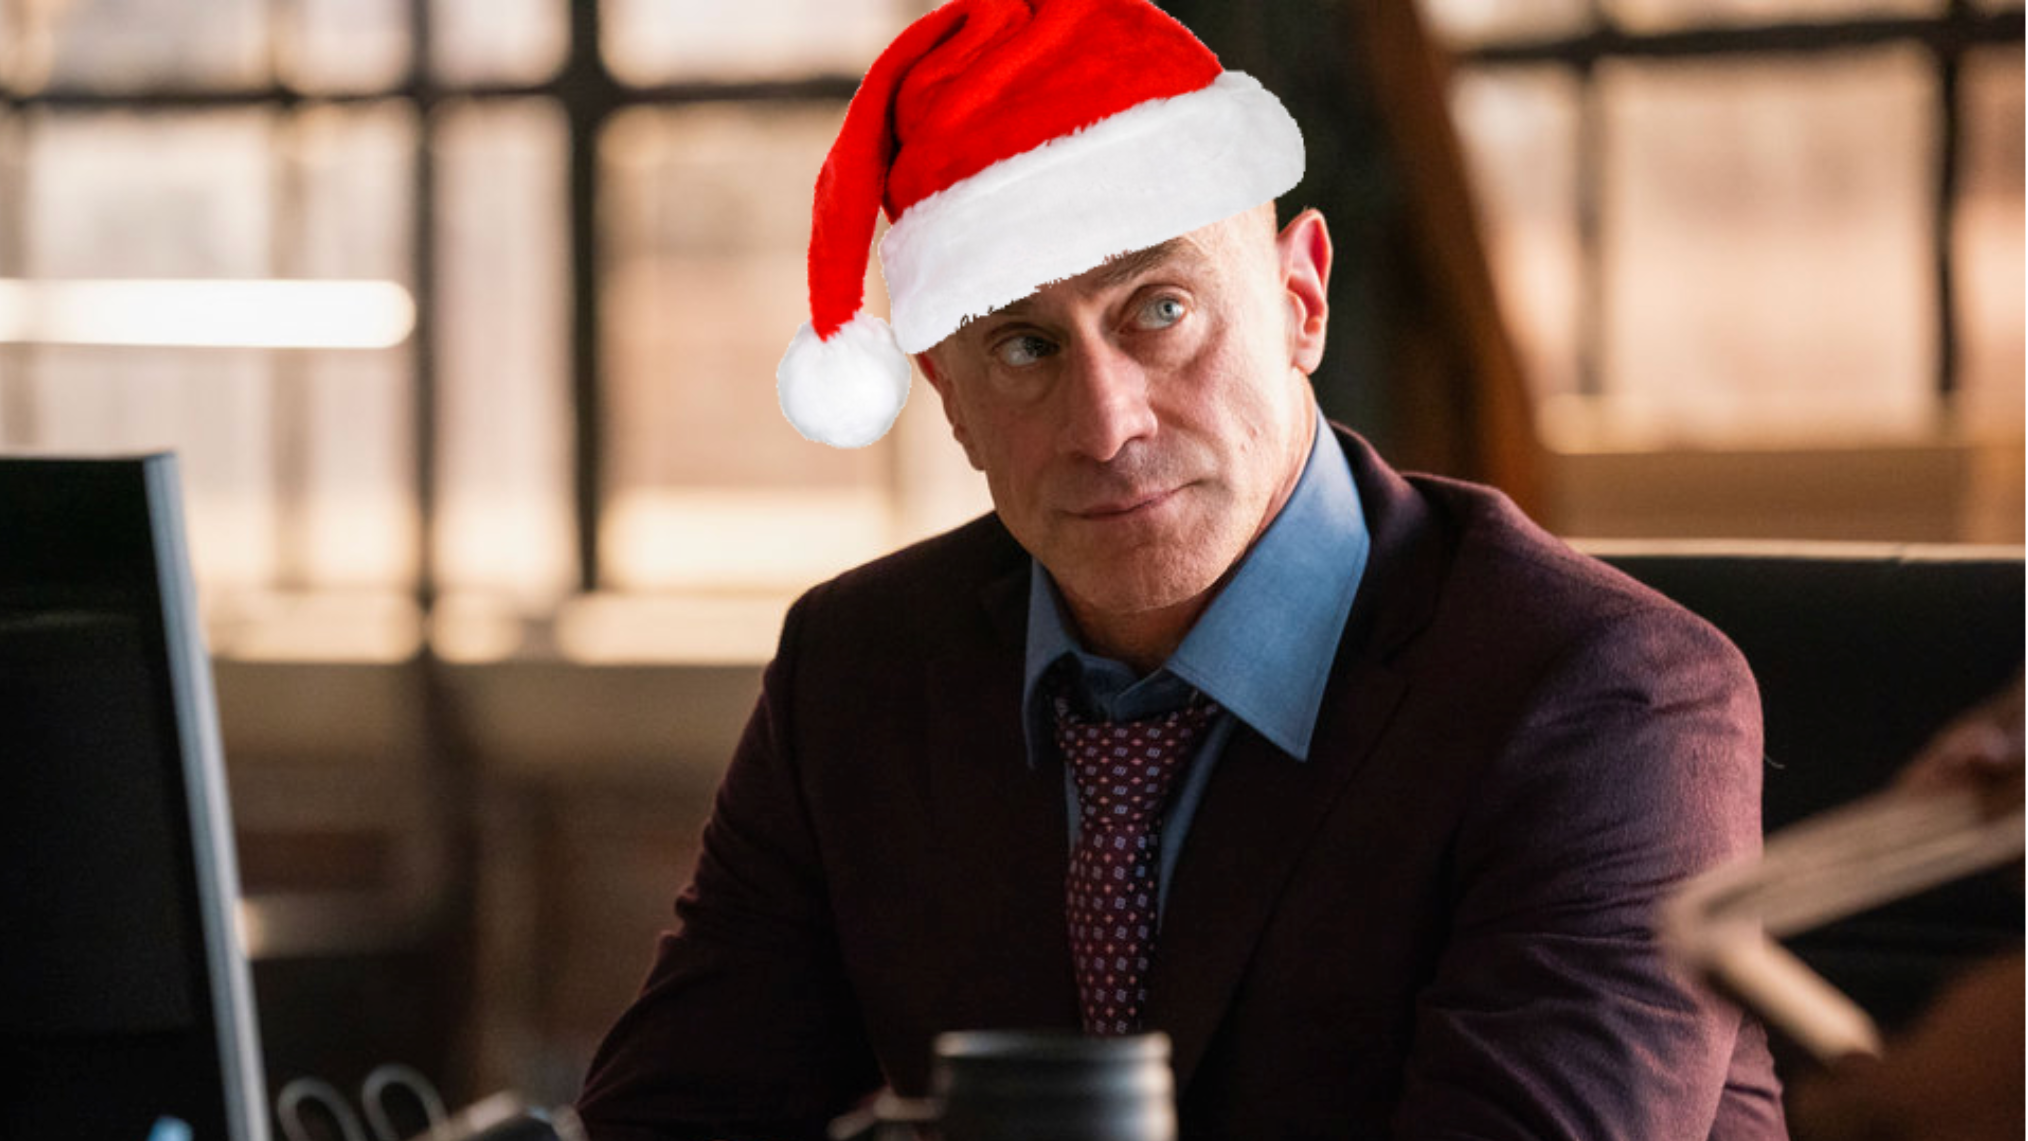 Elliot Stabler's Christmas shopping list must haves Pictured: Christopher Meloni as Elliot